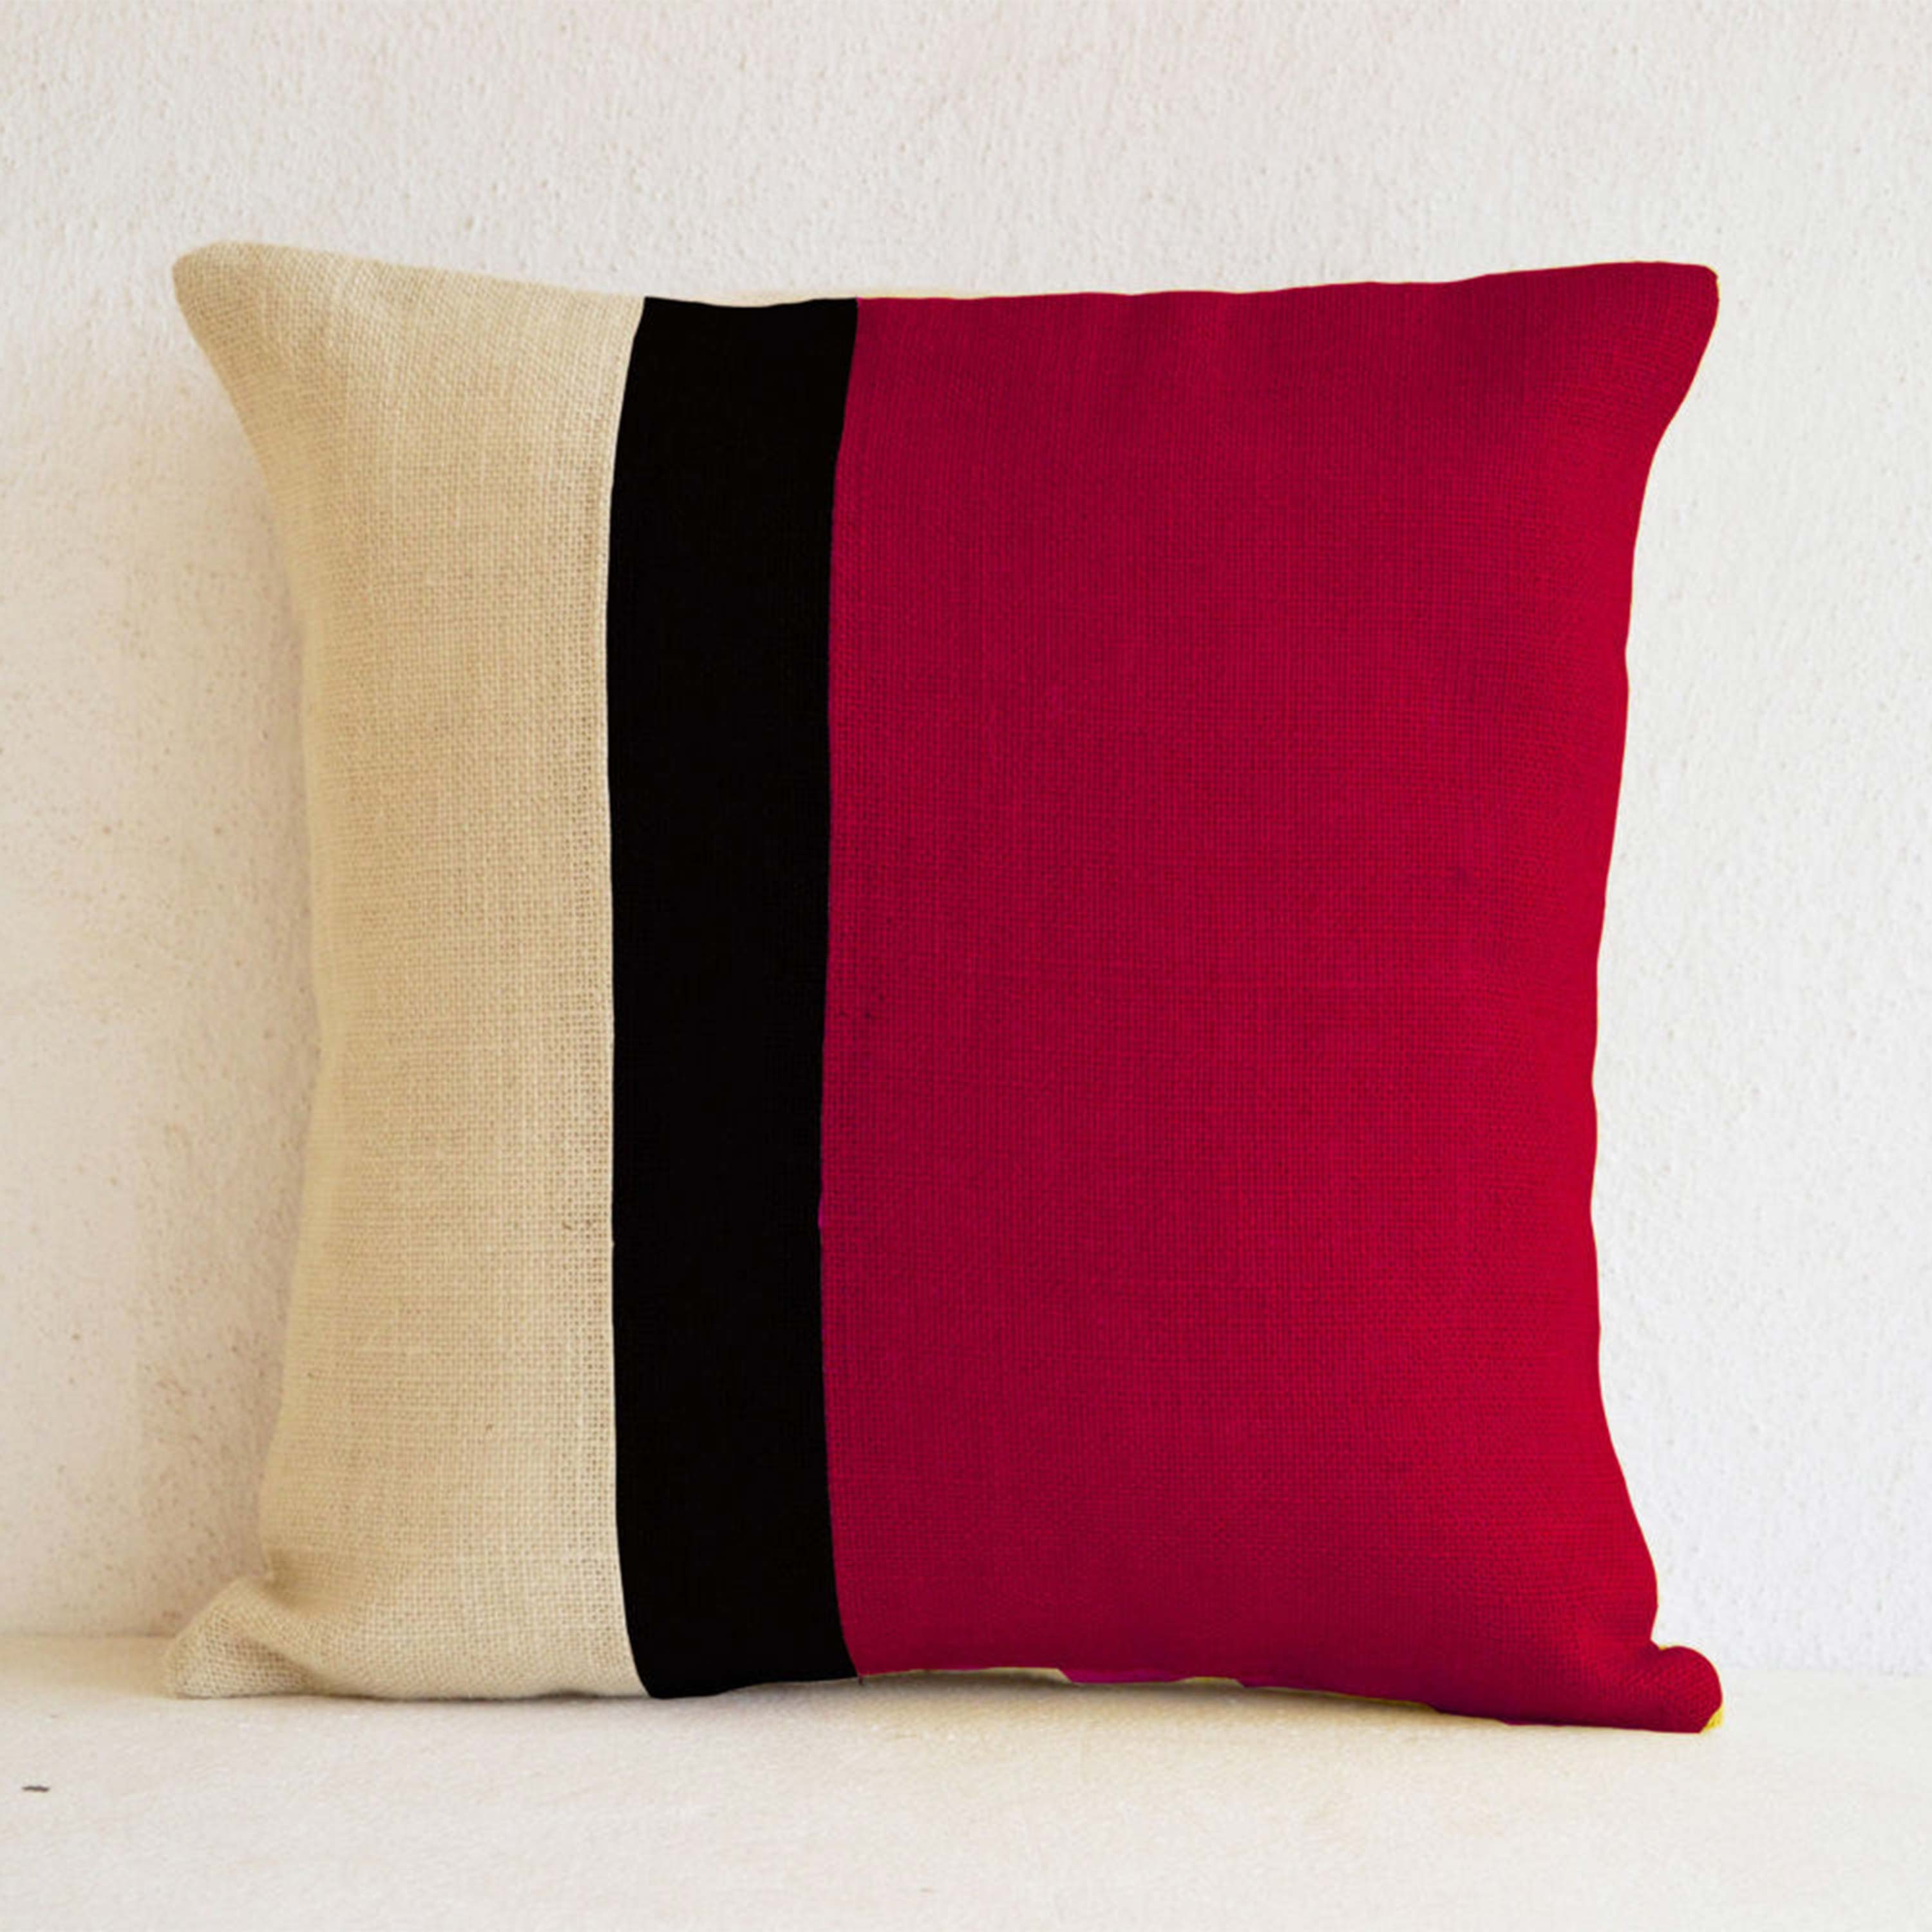 Red Pillow - Burlap Pillow color block - Red Decorative cushion cover- Spring Throw pillow gift 16X16 - Red Euro Sham